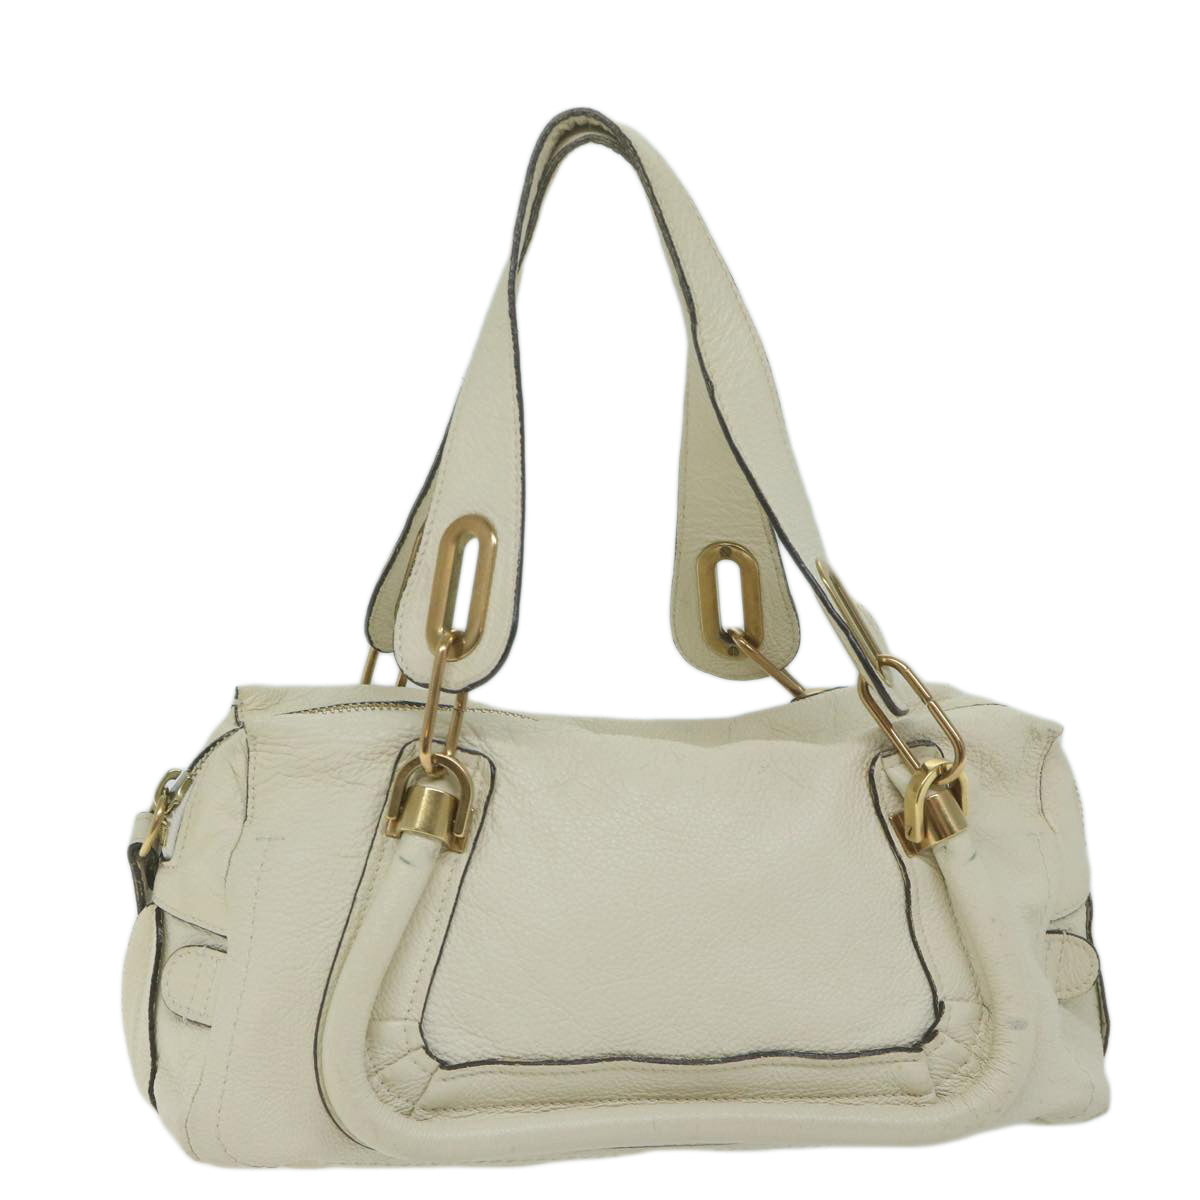 Chloe Paraty Hand Bag Leather White Auth bs11780